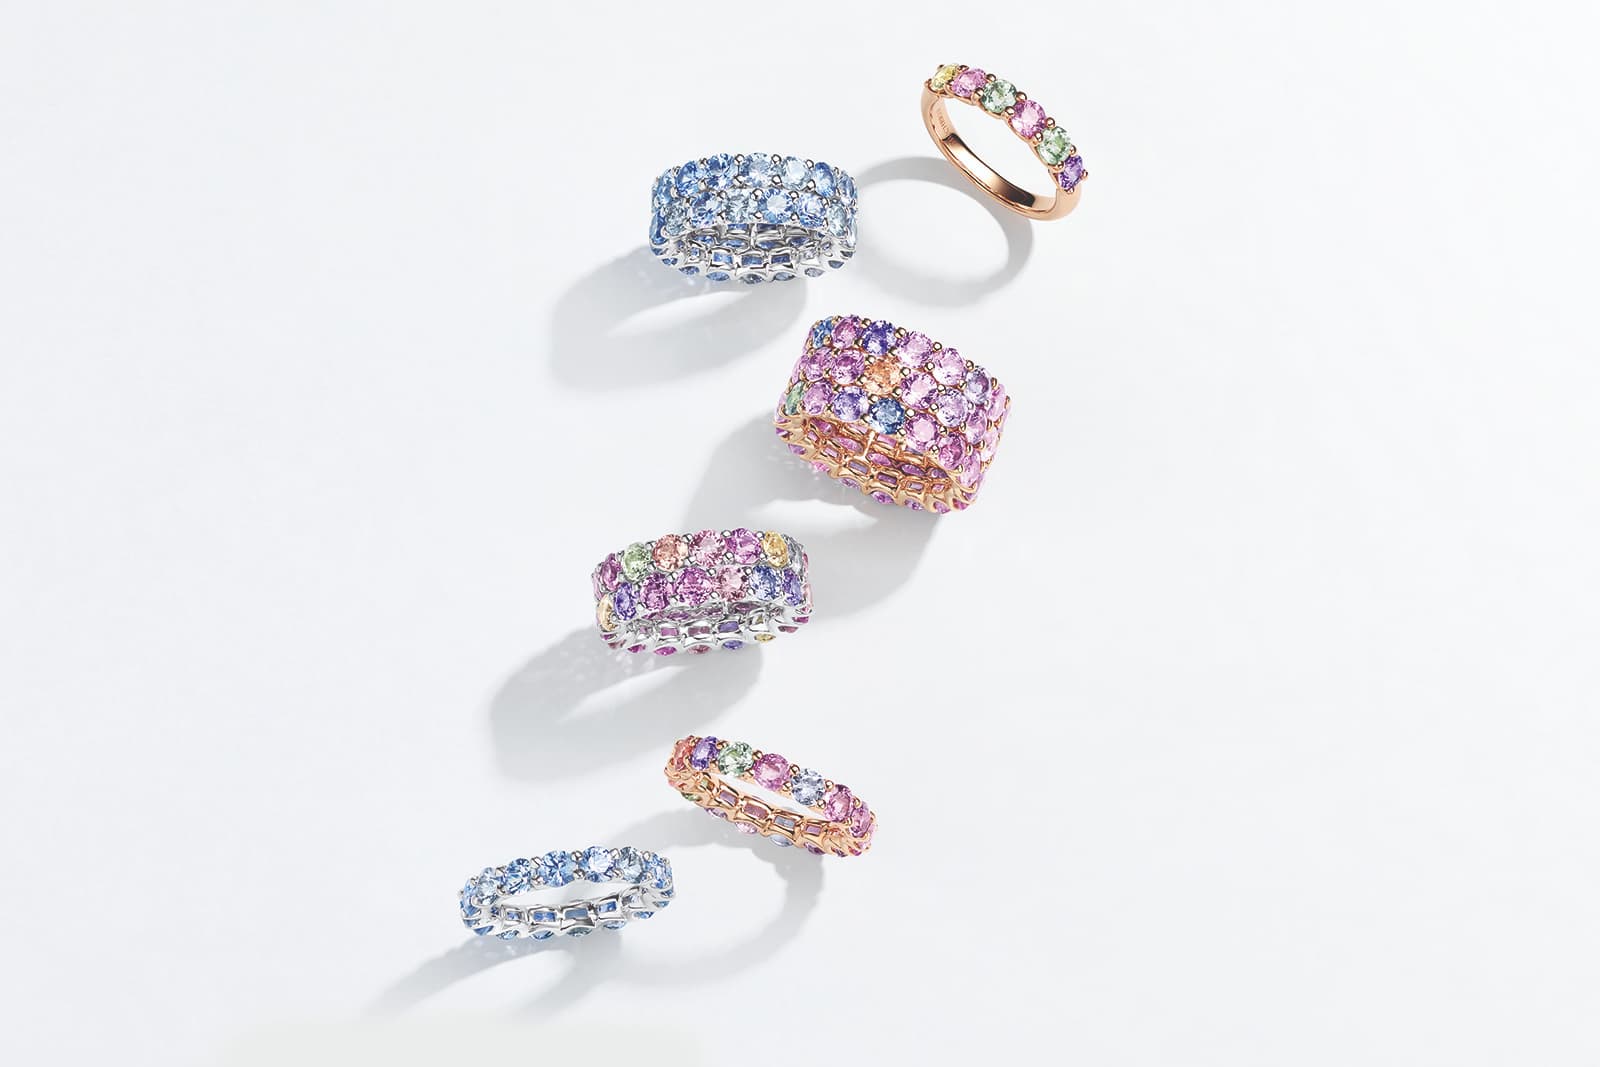 Bucherer Fine Jewellery natural fancy-coloured sapphires from the Pastello Collection